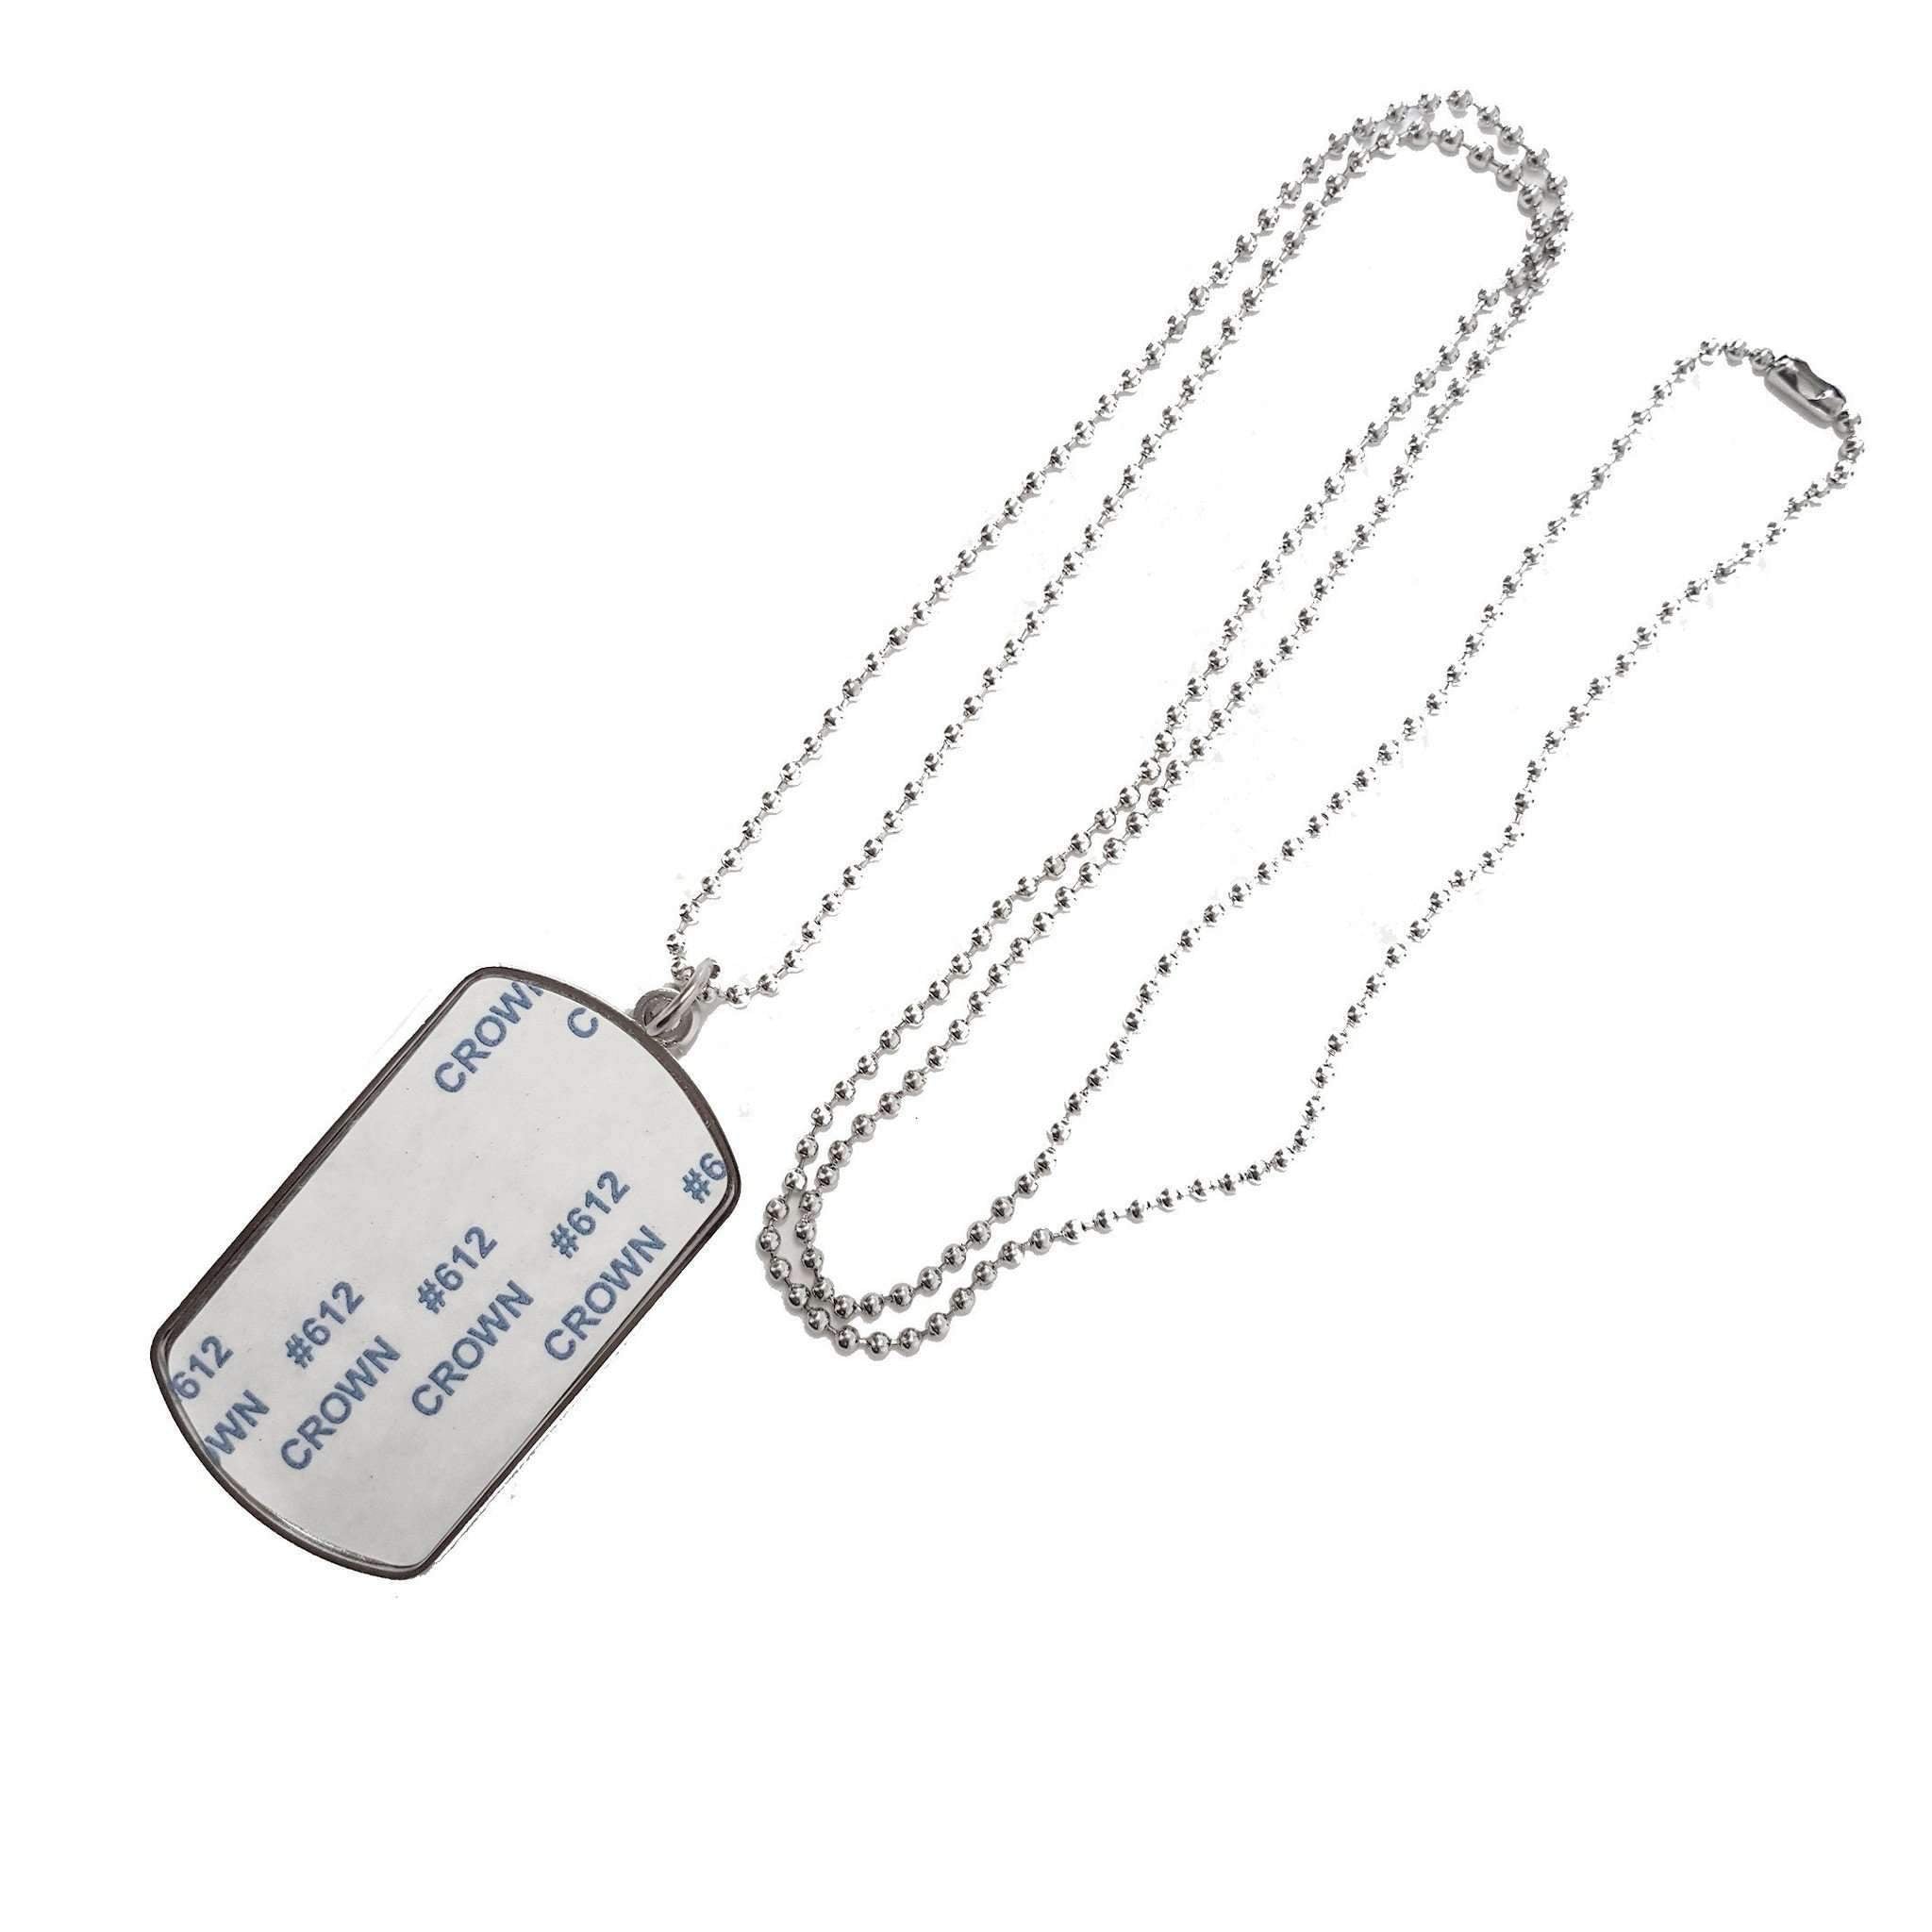 Dog tag necklace for sublimation printing – SubliBlanks Limited